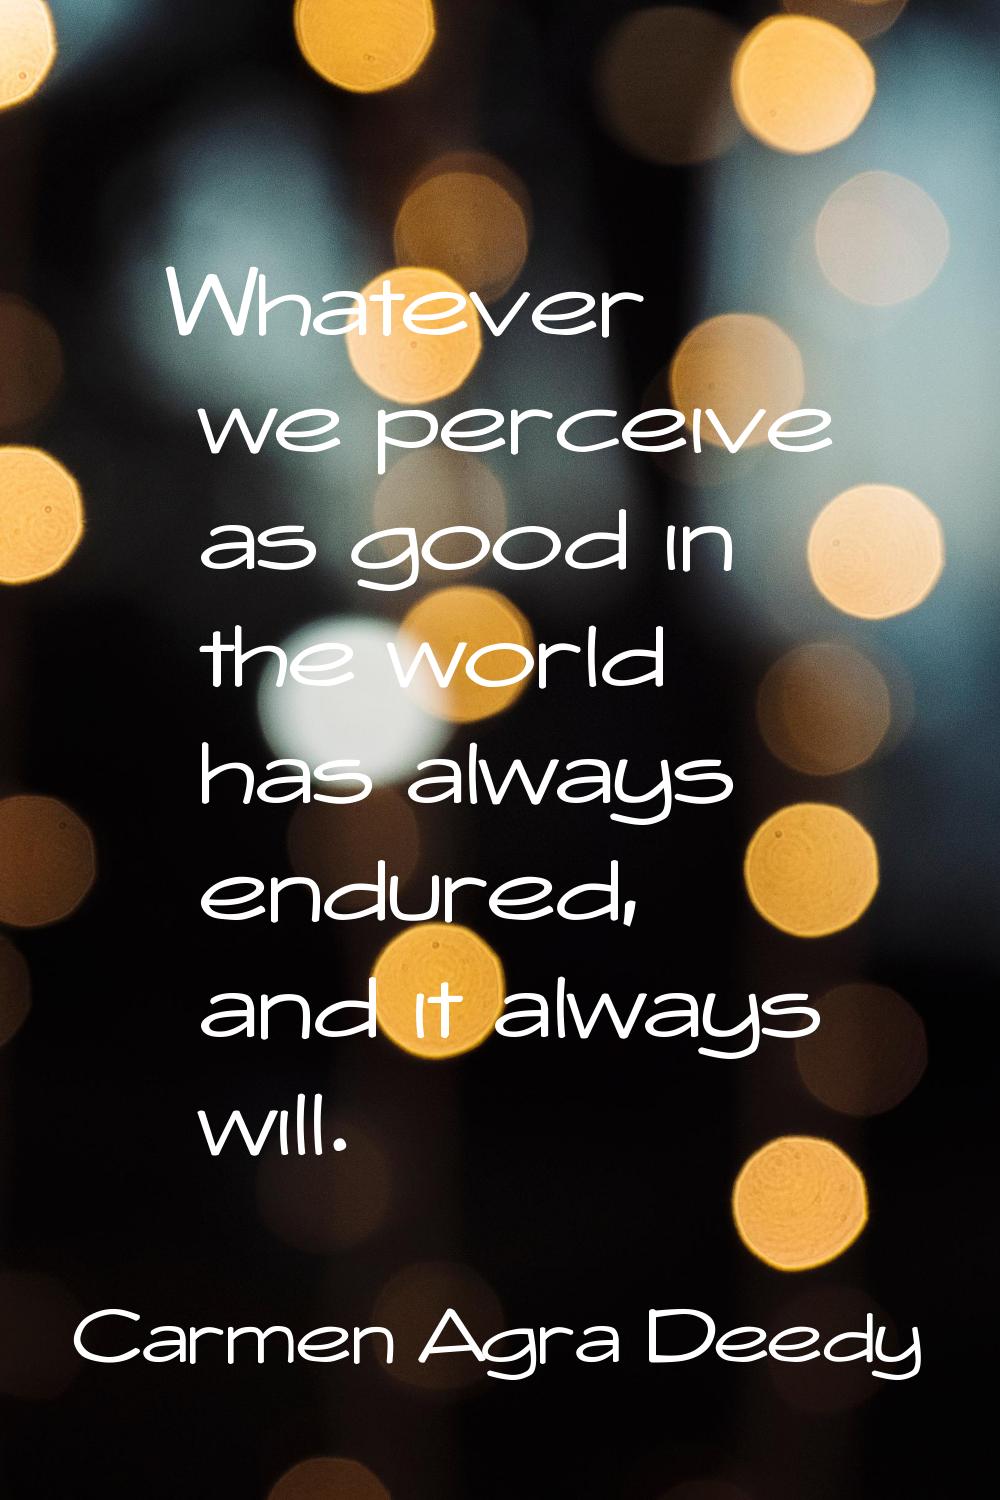 Whatever we perceive as good in the world has always endured, and it always will.